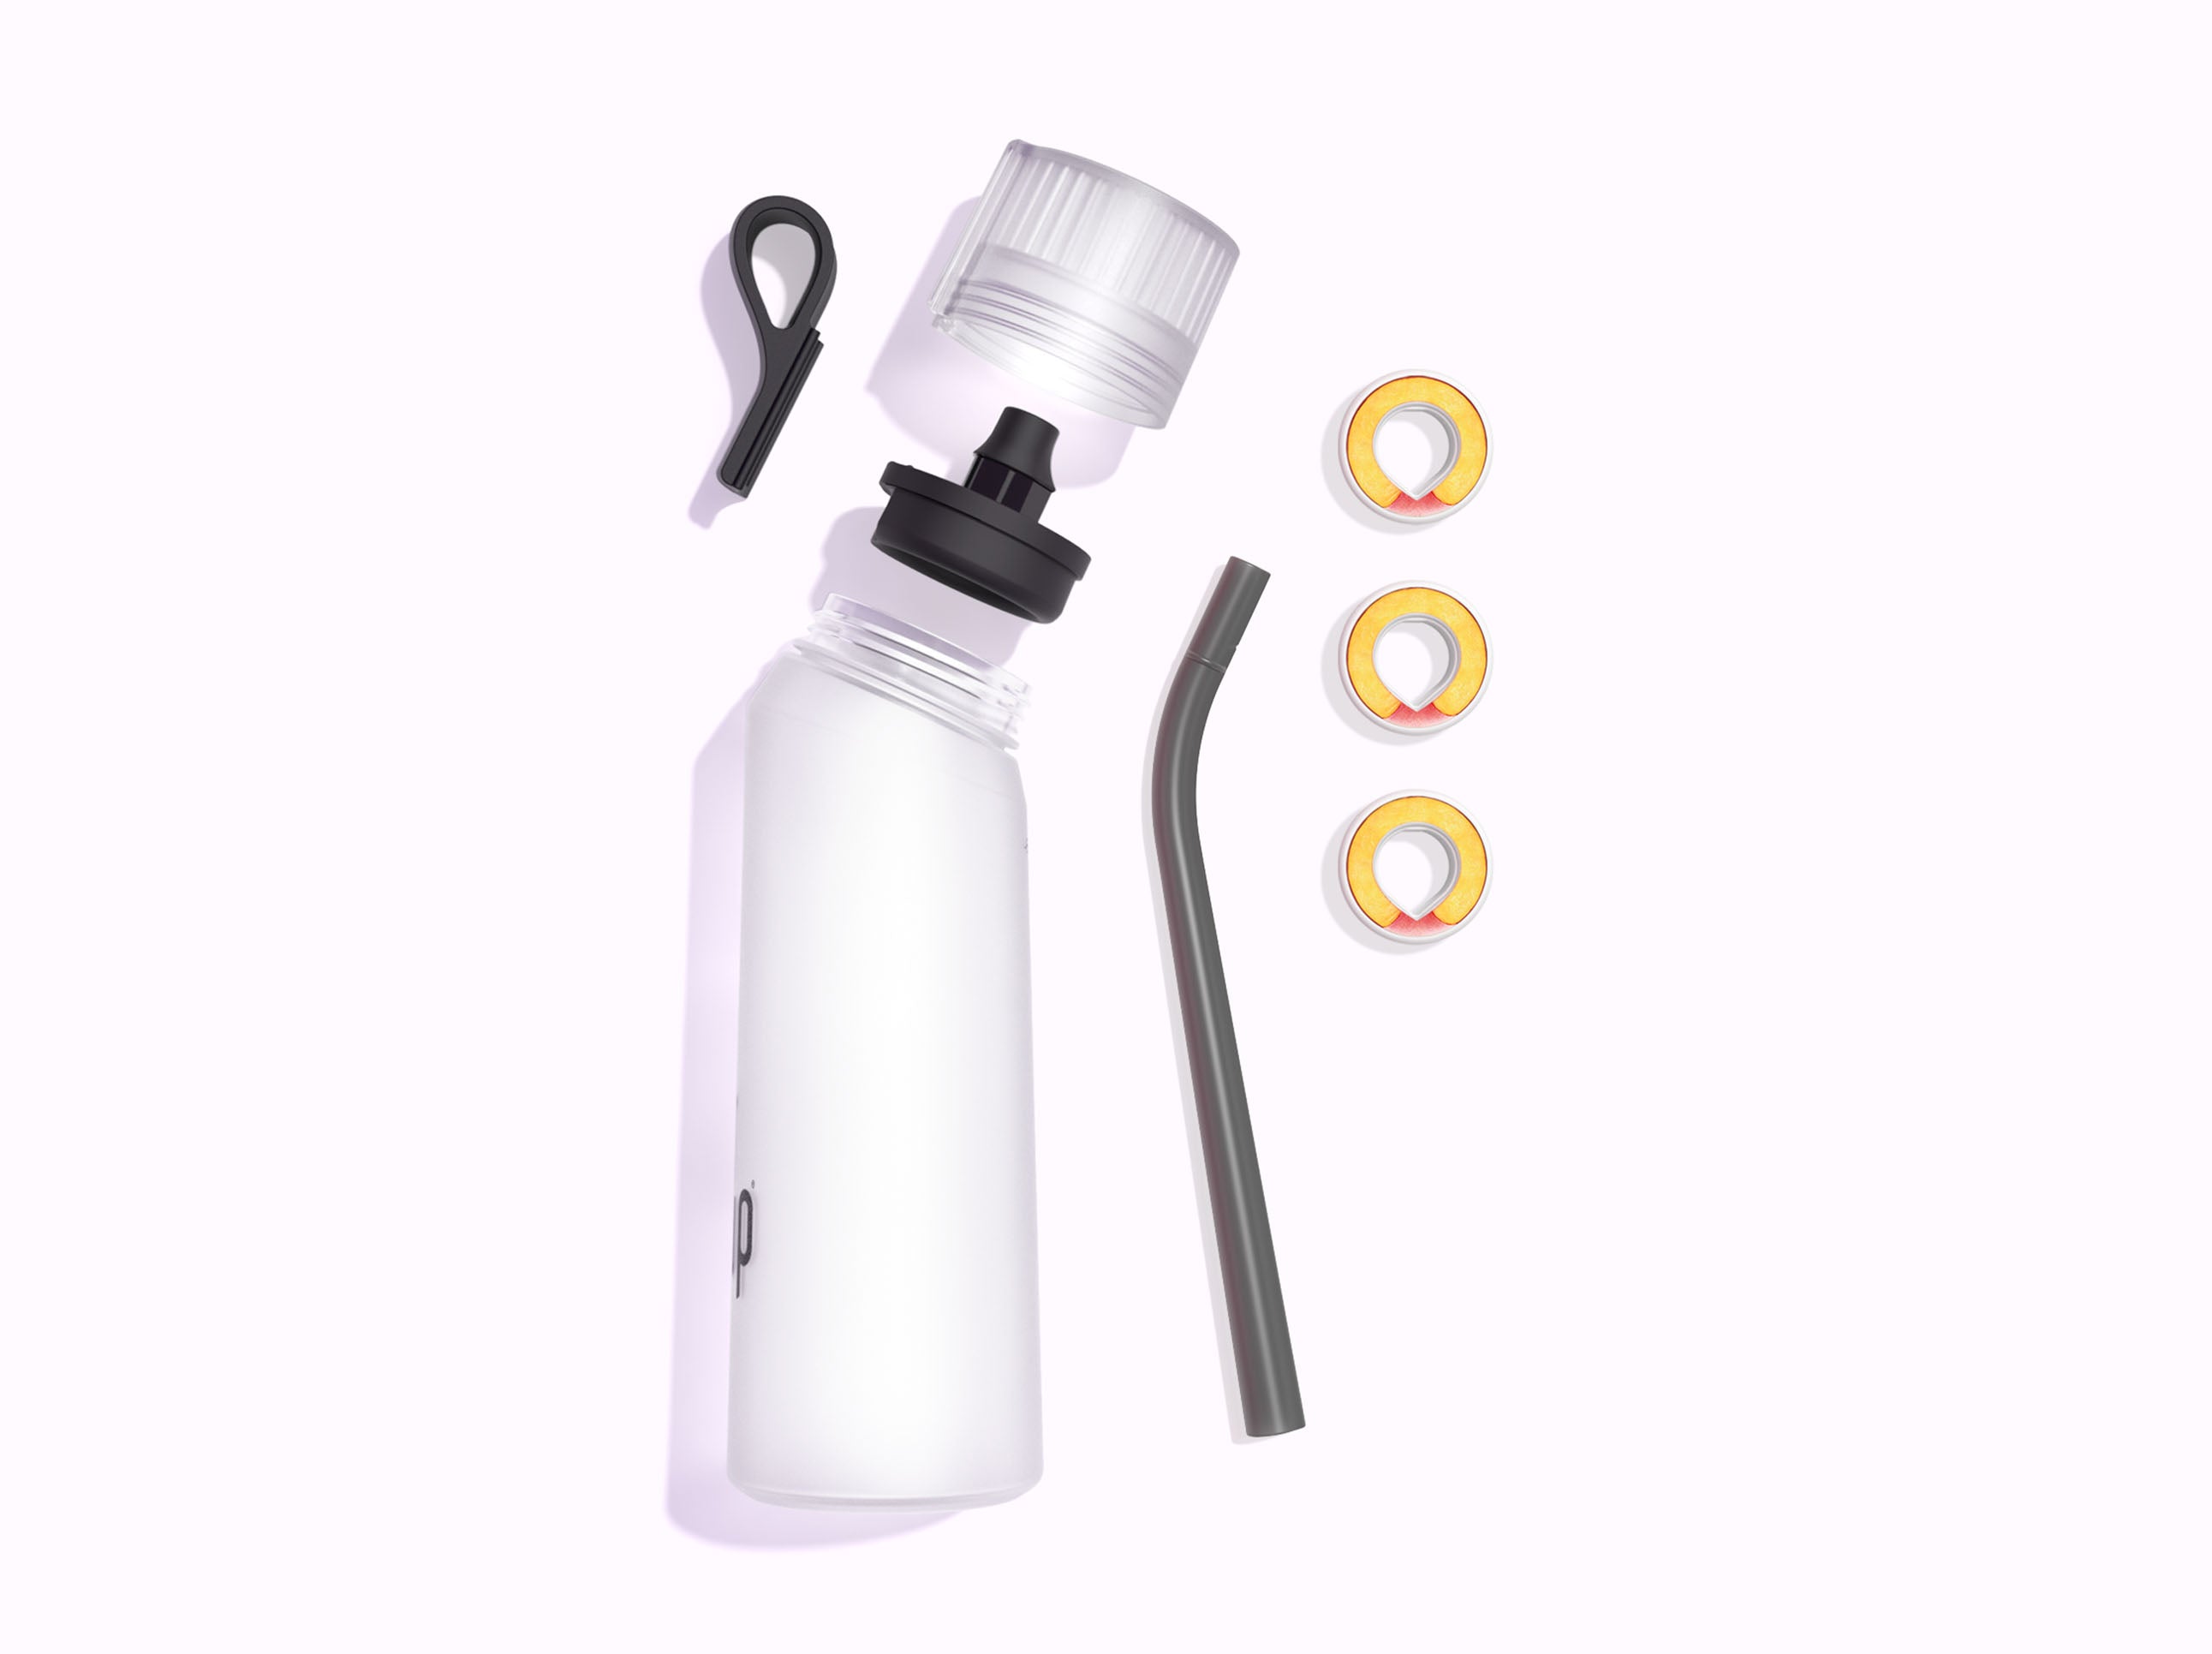 https://cdn.shopify.com/s/files/1/0635/3610/3657/products/PDP-Featureshot-Bottle-white-explosion-3Pods-Peach-US.jpg?v=1704096454